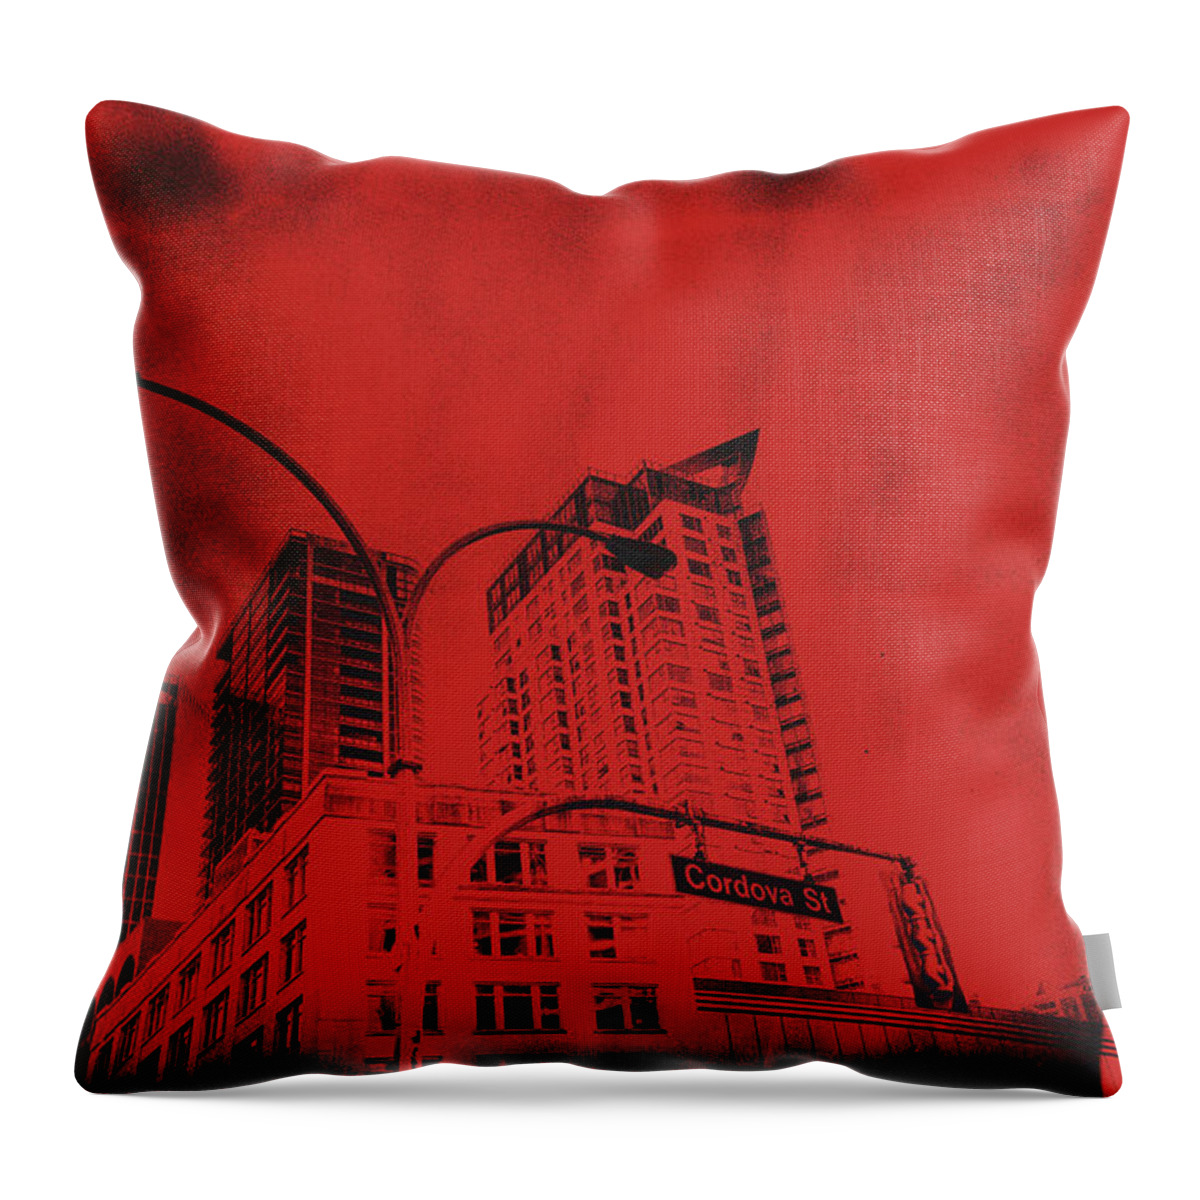 Red Throw Pillow featuring the photograph 0257 Cordova Street Vancouver Canada Gastown by Amyn Nasser Neptune Gallery